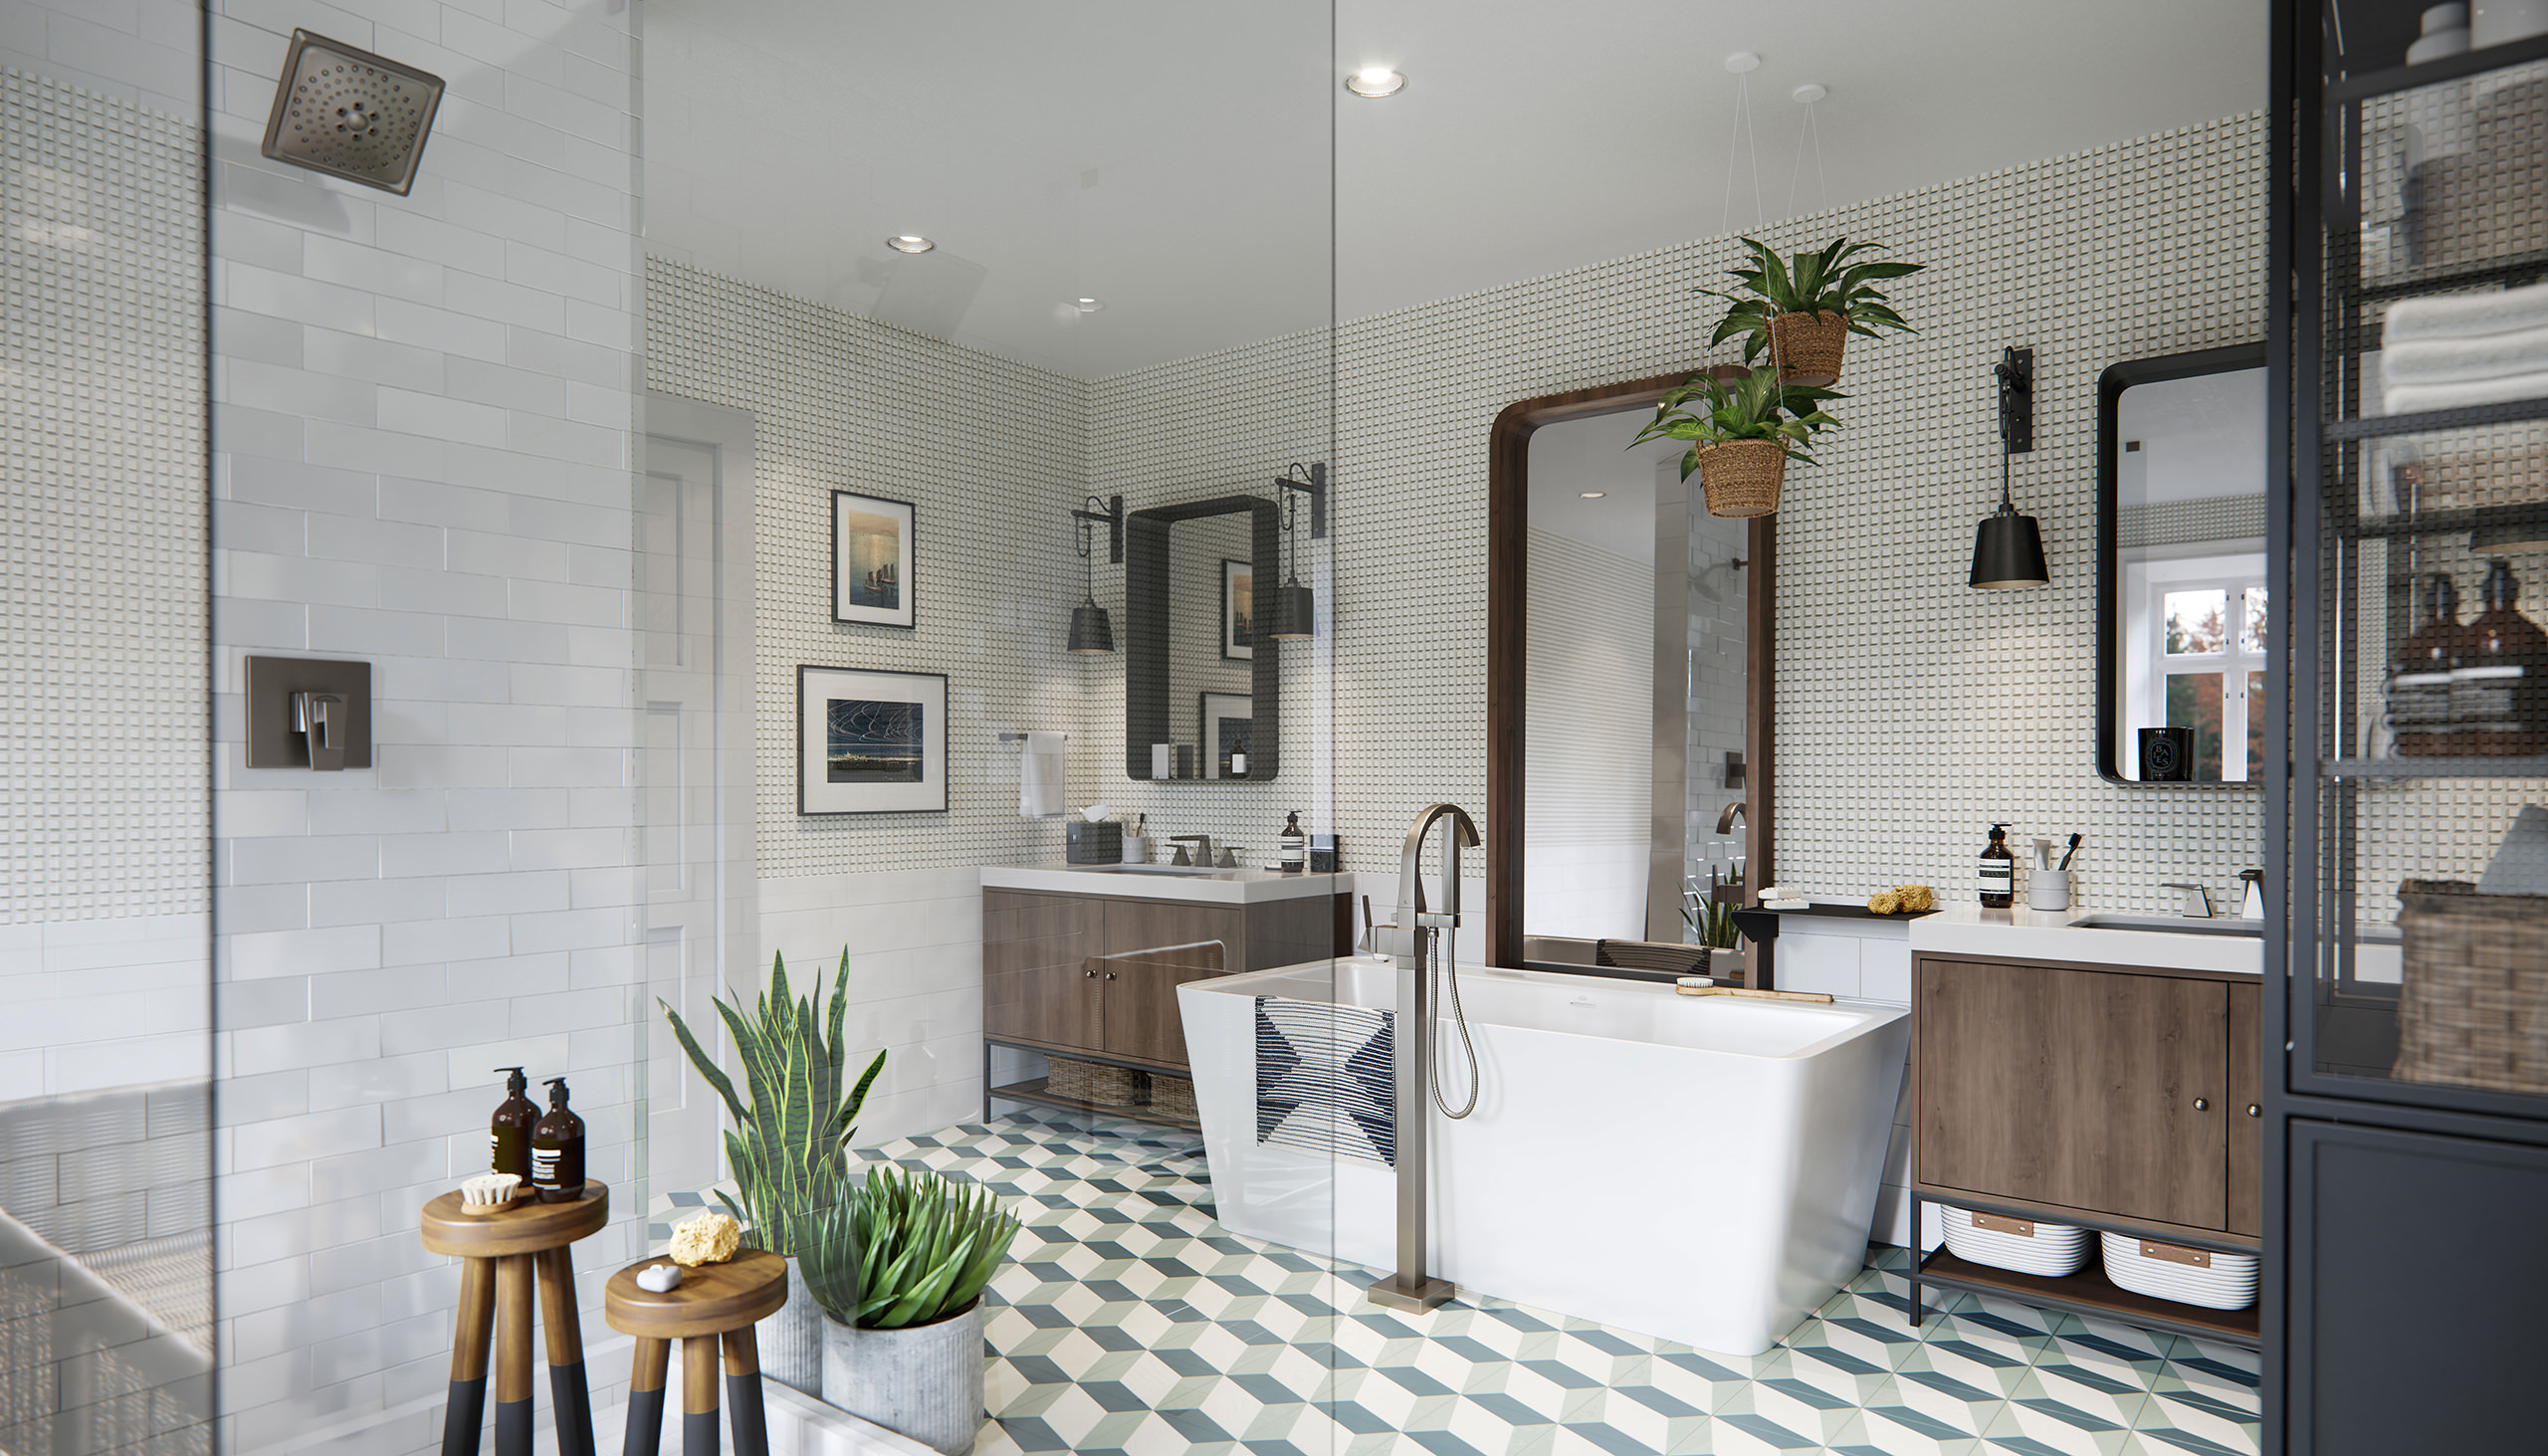 Interior visualization of a modern family-oriented bathroom with geometric patterns on walls and floor